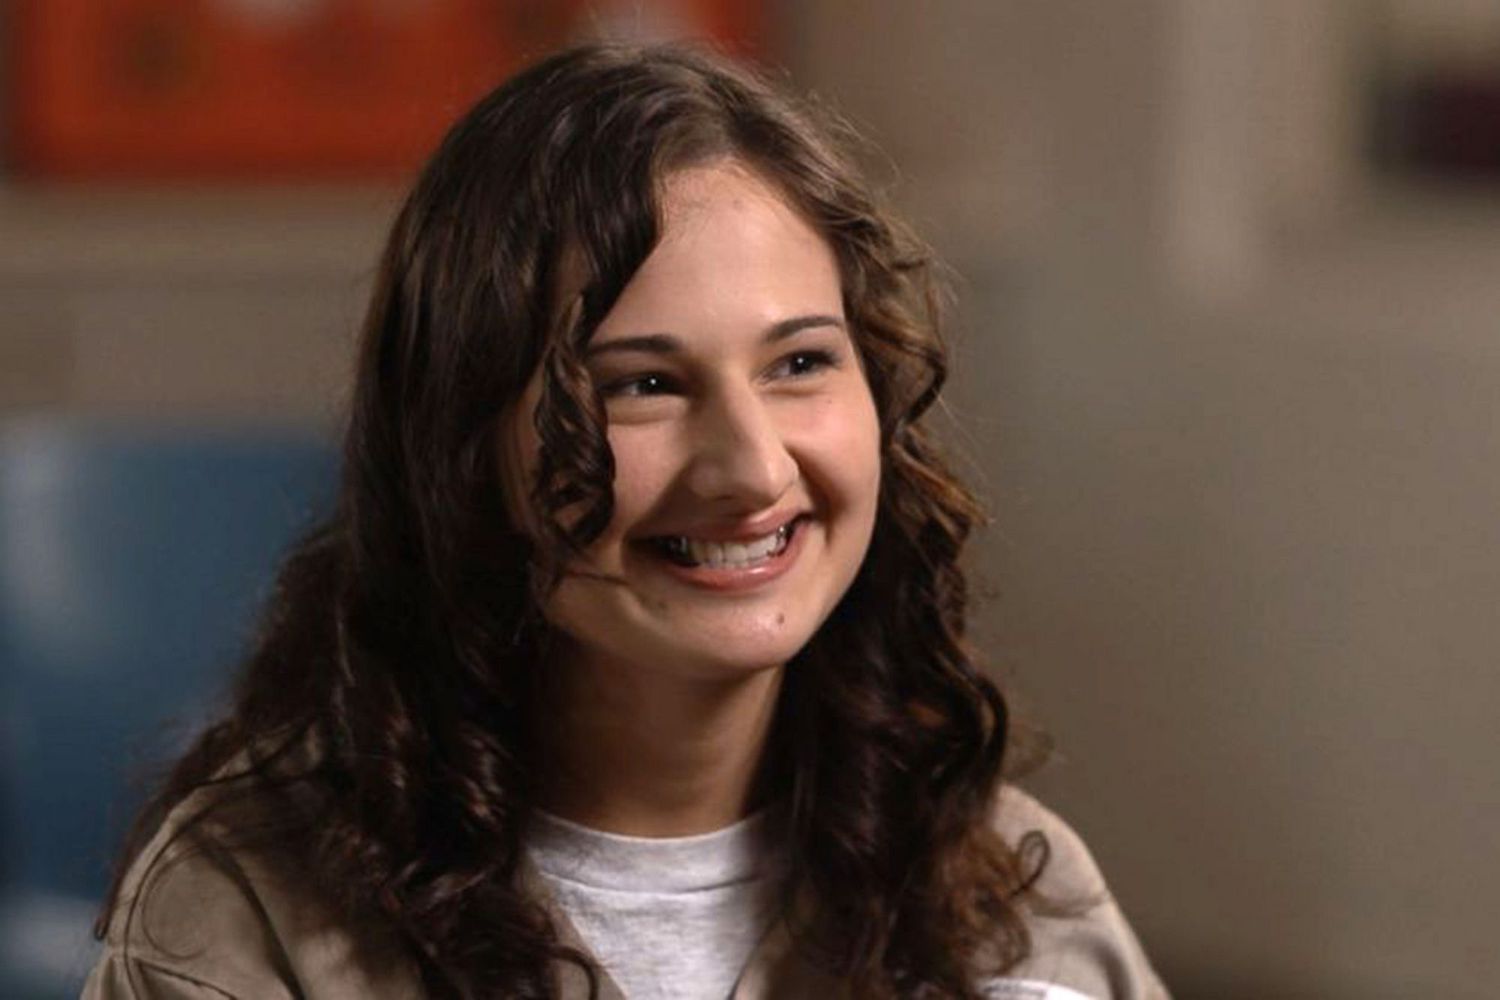 Gypsy Rose Blanchard To Be Released From Prison After 7 Years post thumbnail image